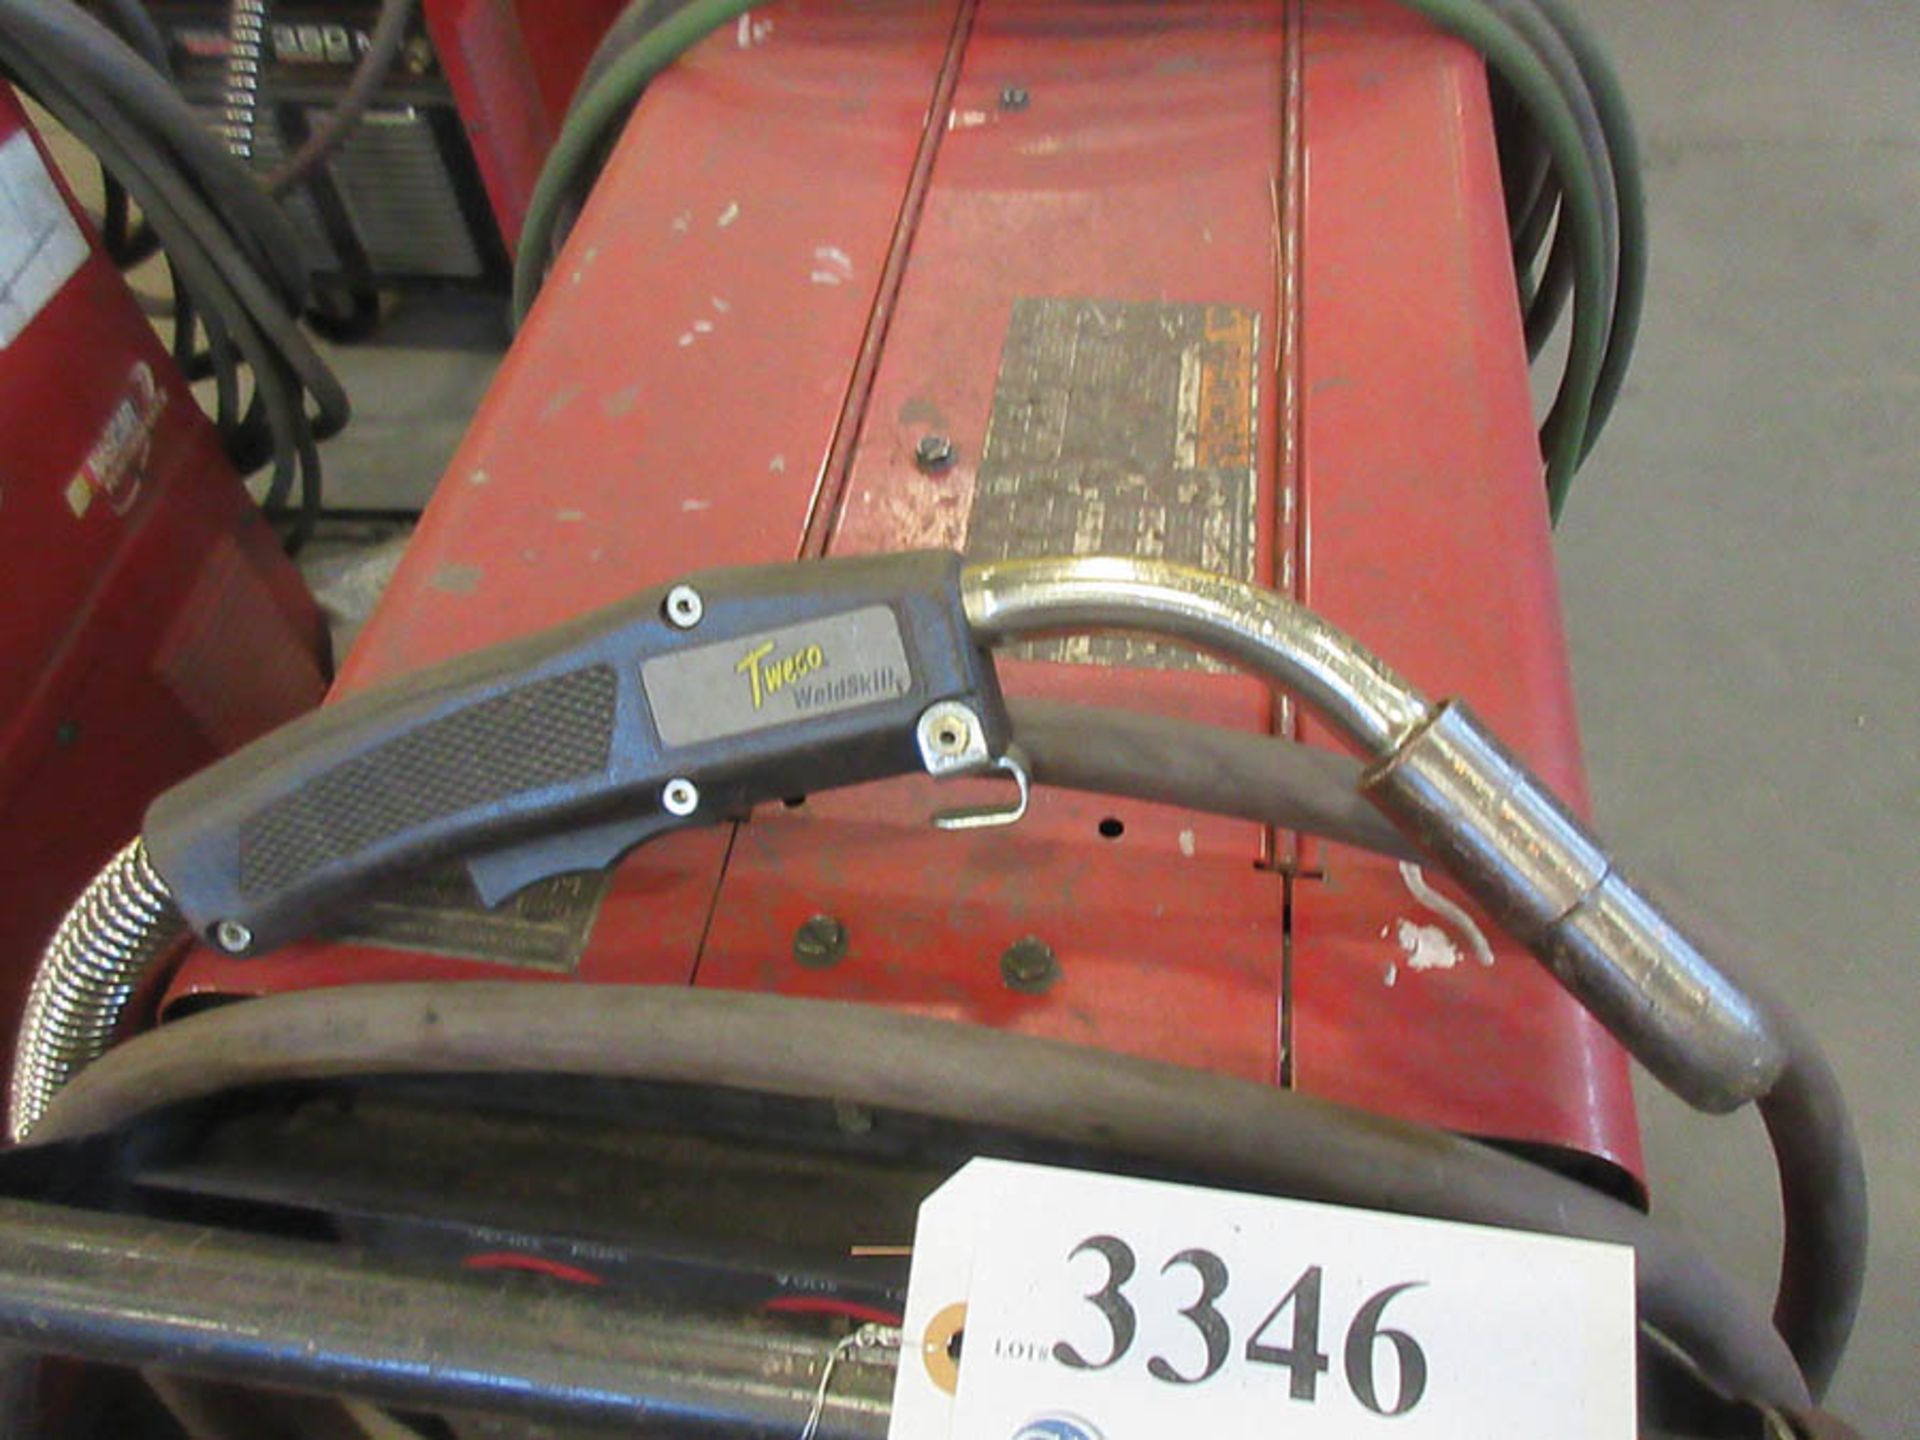 LINCOLN ELECTRIC 350MP POWER MIG WELDER WITH TWECO WELDSKILL MIG GUN, #BAY 8 - Image 3 of 3